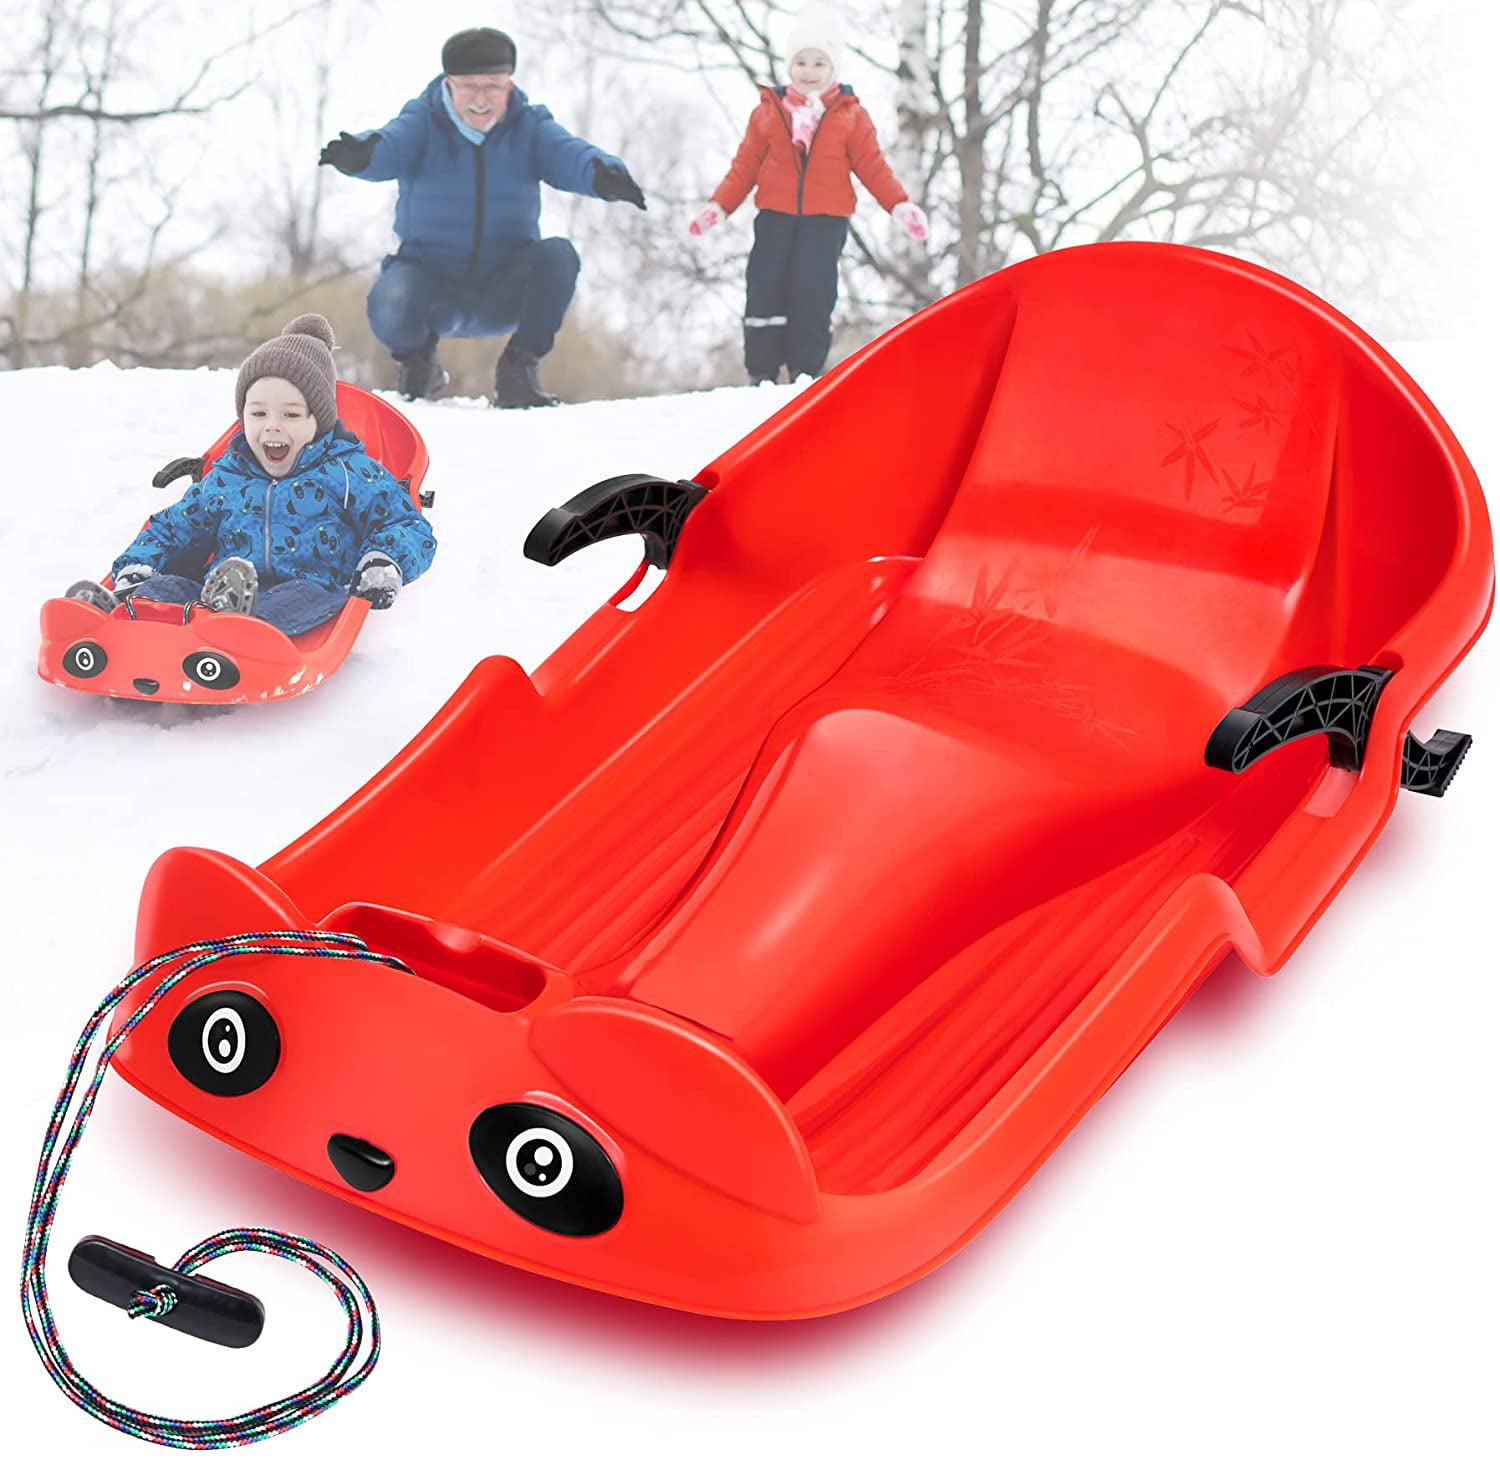 RED Children's Kid's Snow Sledge with Steering brakes Sled Sleigh Winter Fun 